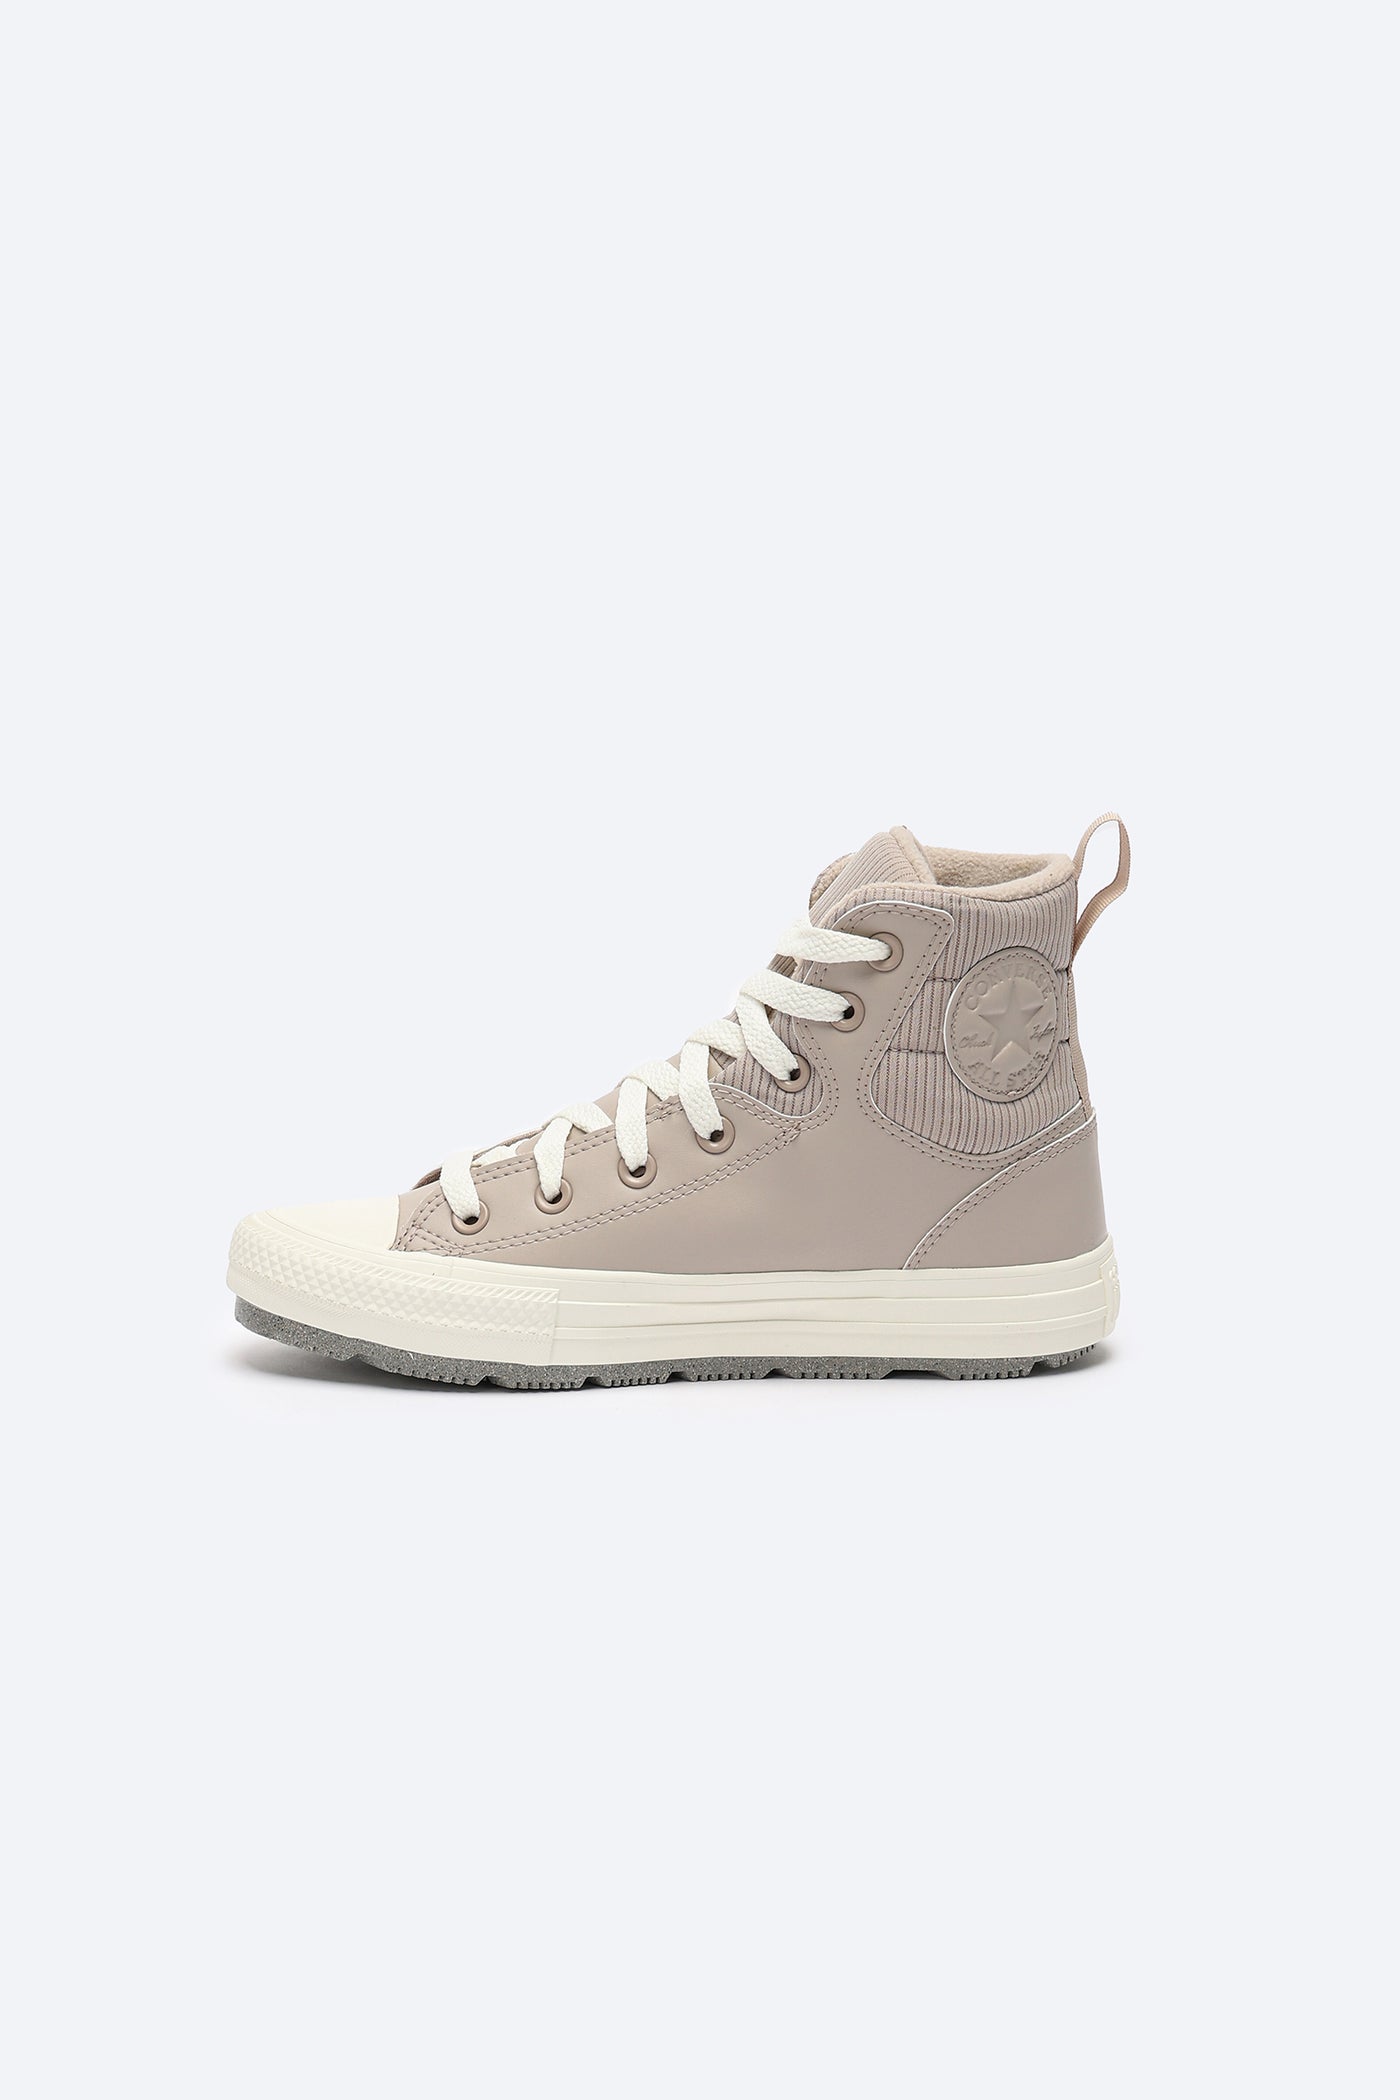 Sneakers - Chuck Taylor All Star Berkshire Boot - High Top